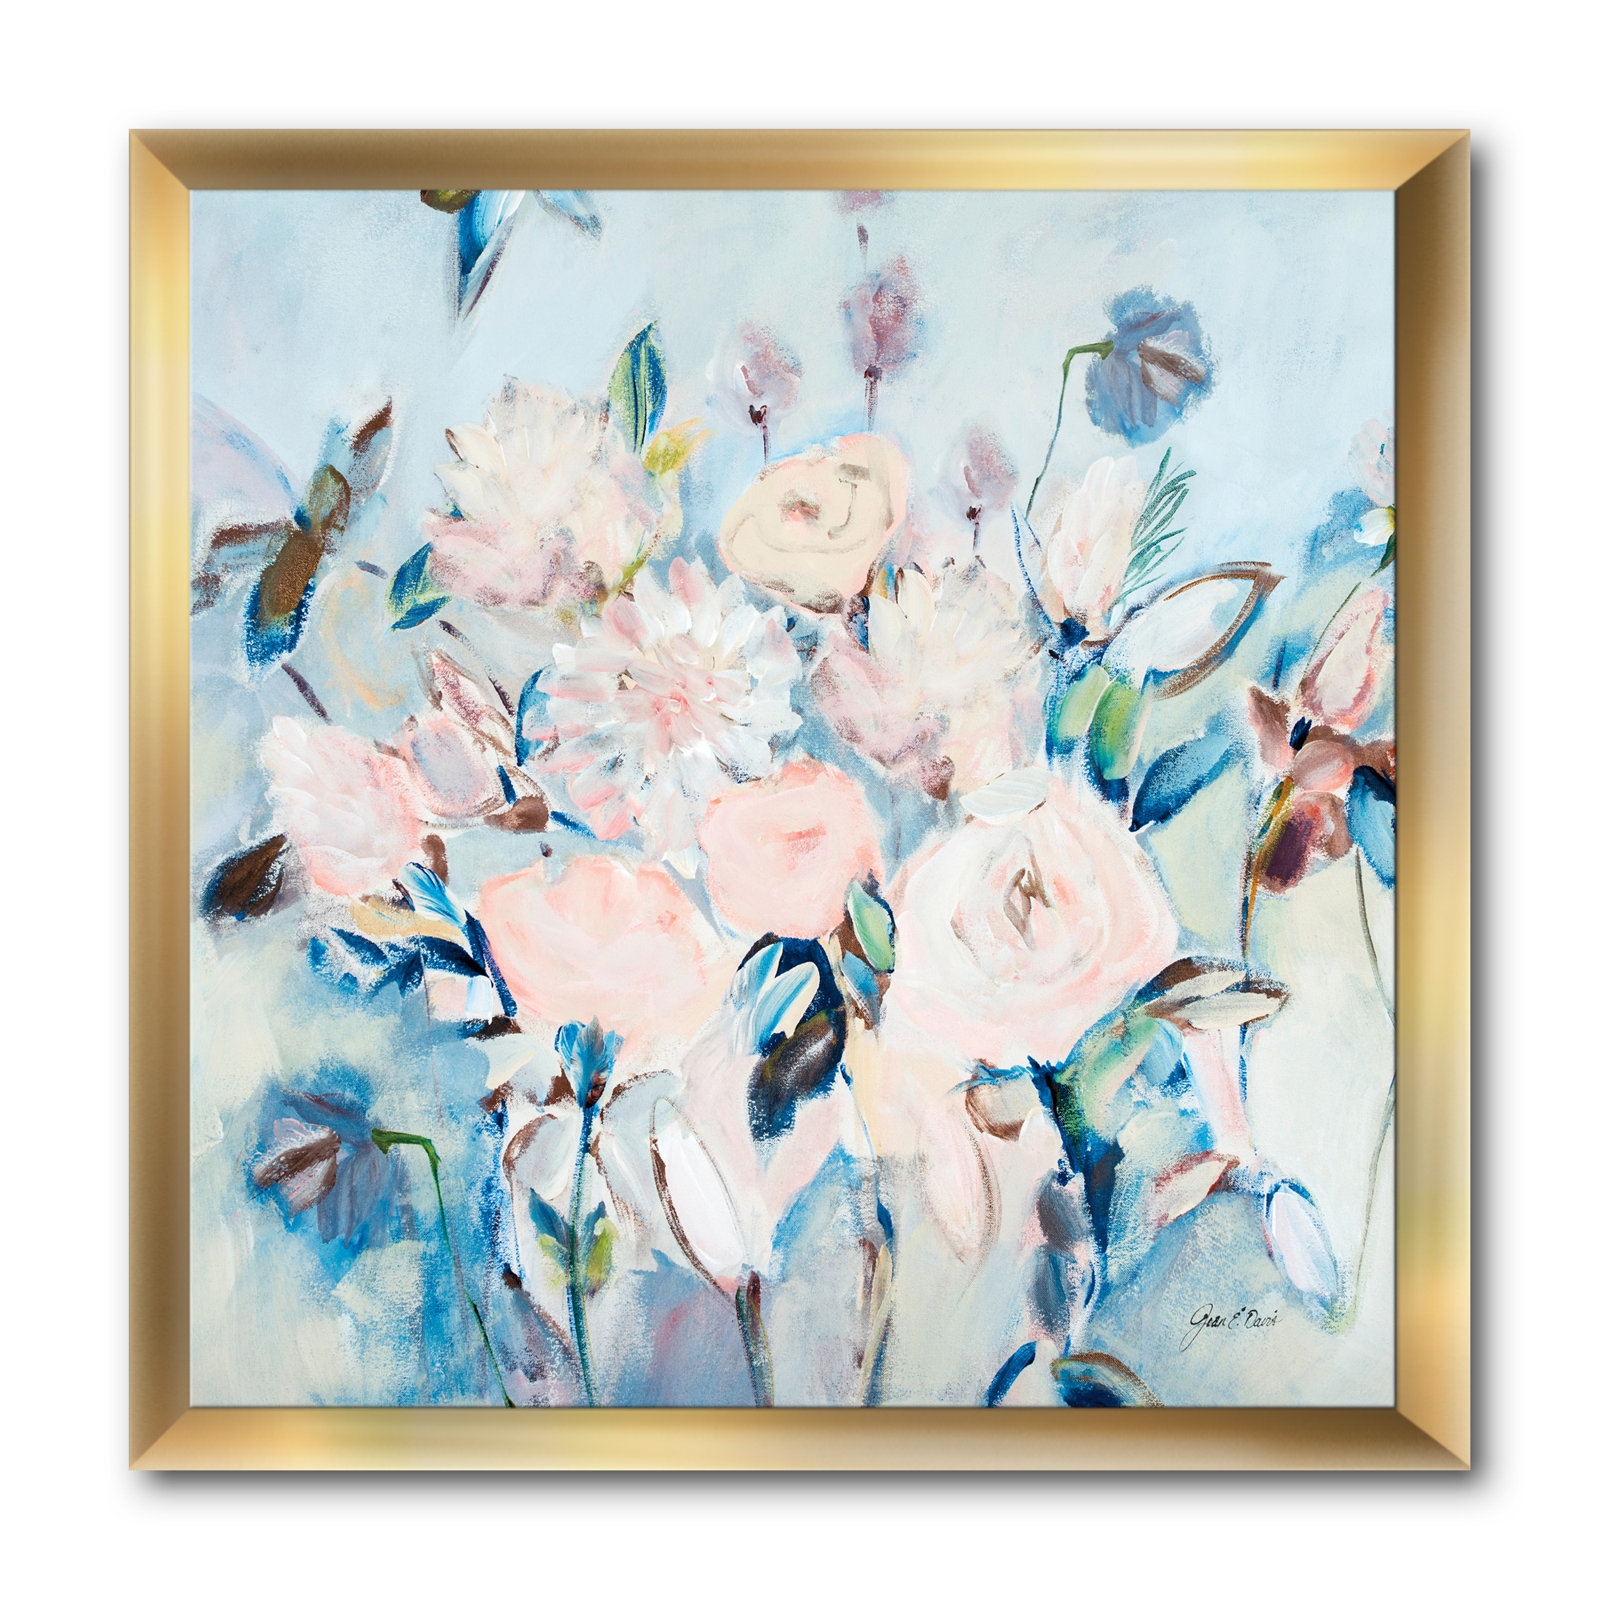 'Abstract Pink Flowers Farmhouse Waterpainting' - Picture Frame Print on Canvas - Image 1